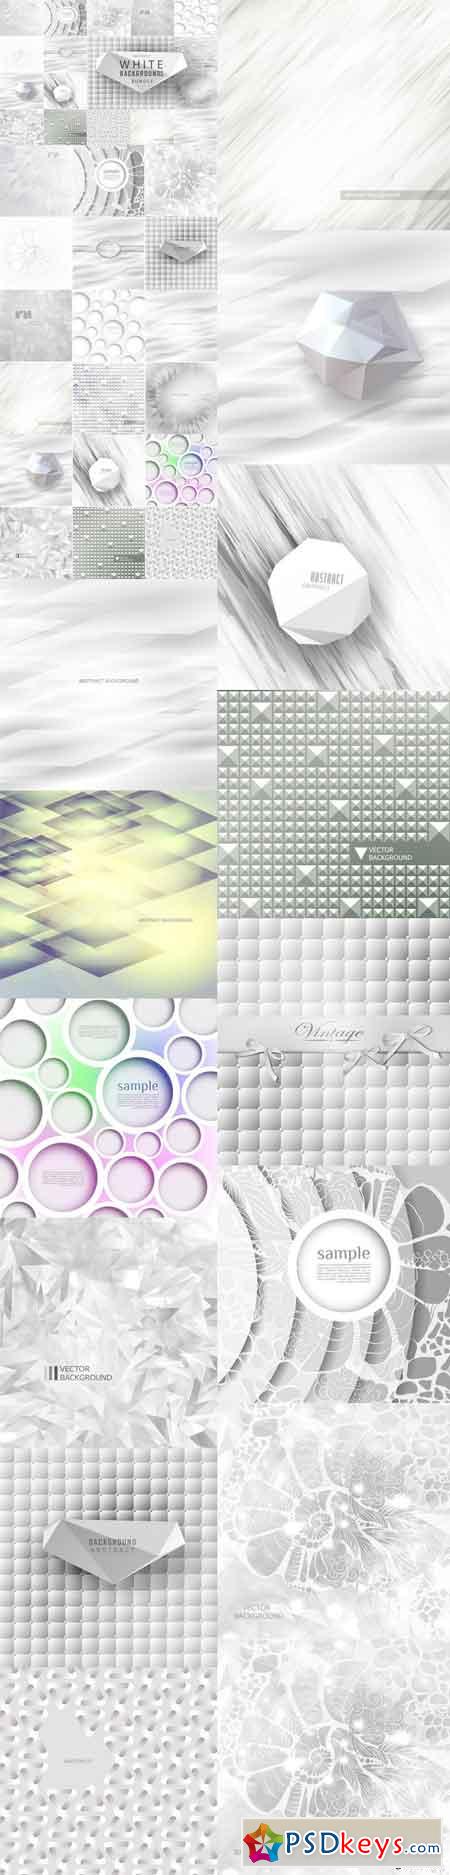 Abstract white backgrounds bundle 810951